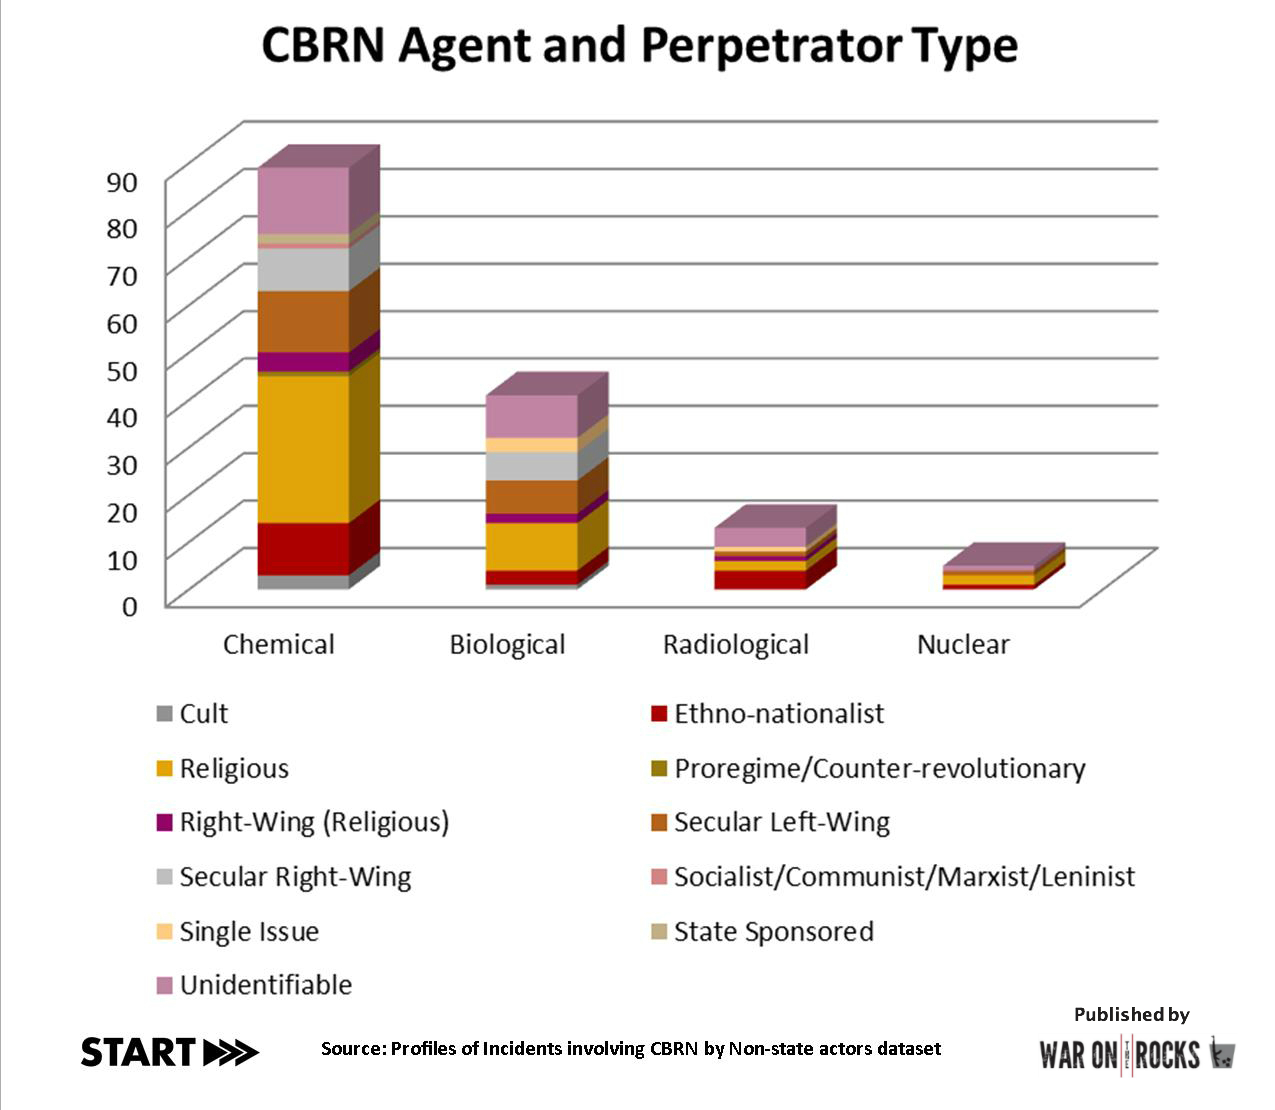 START CBRN Agent and Perpetrator Type